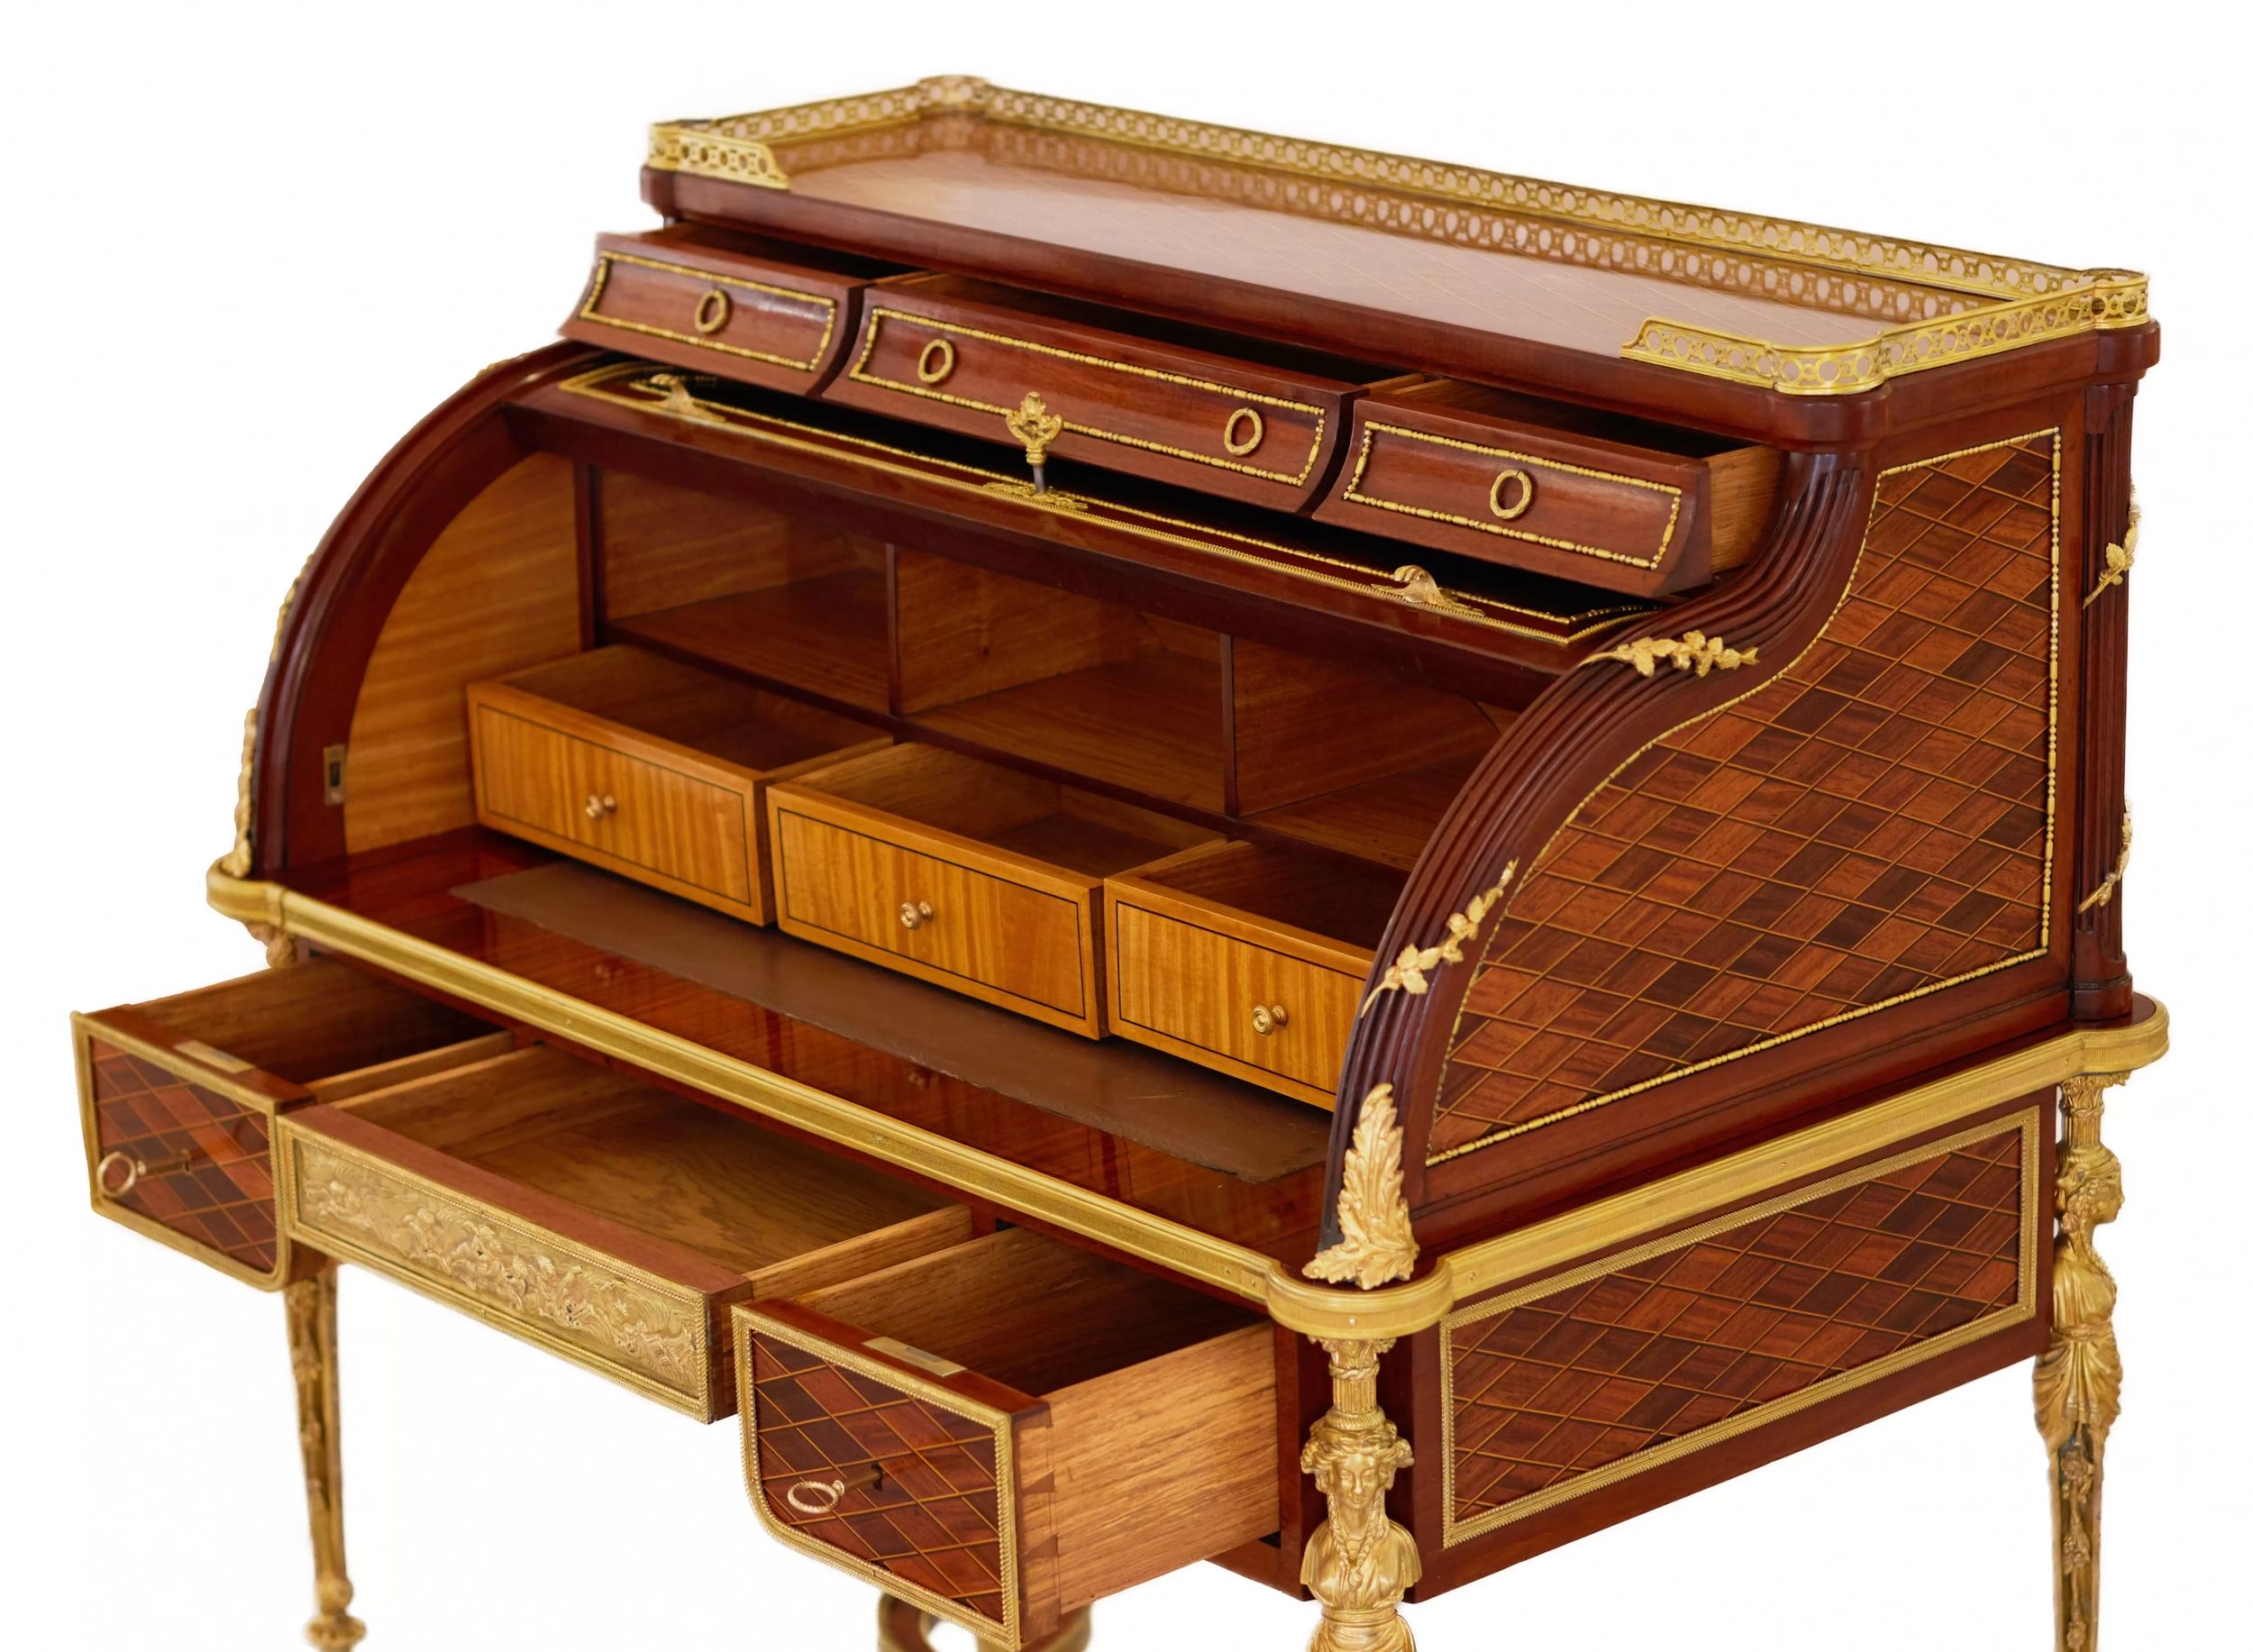 E.KAHN. A magnificent cylindrical bureau in mahogany and satin wood with gilt bronze. - Image 7 of 14